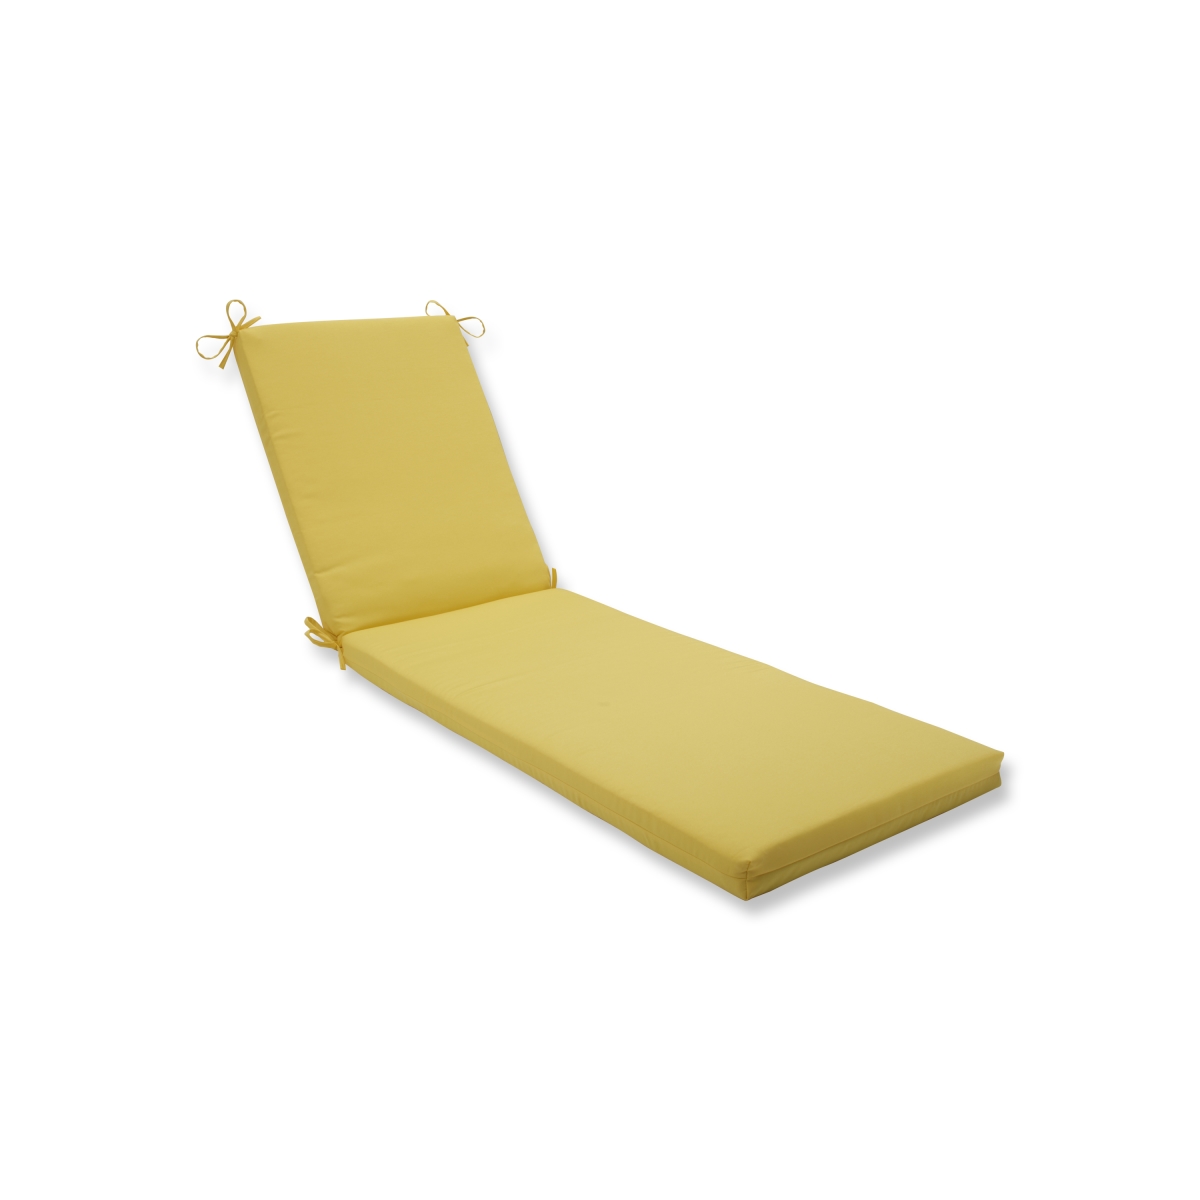 80 X 23 X 3 In. Outdoor & Indoor Fresco Solids Chaise Lounge Cushion, Yellow